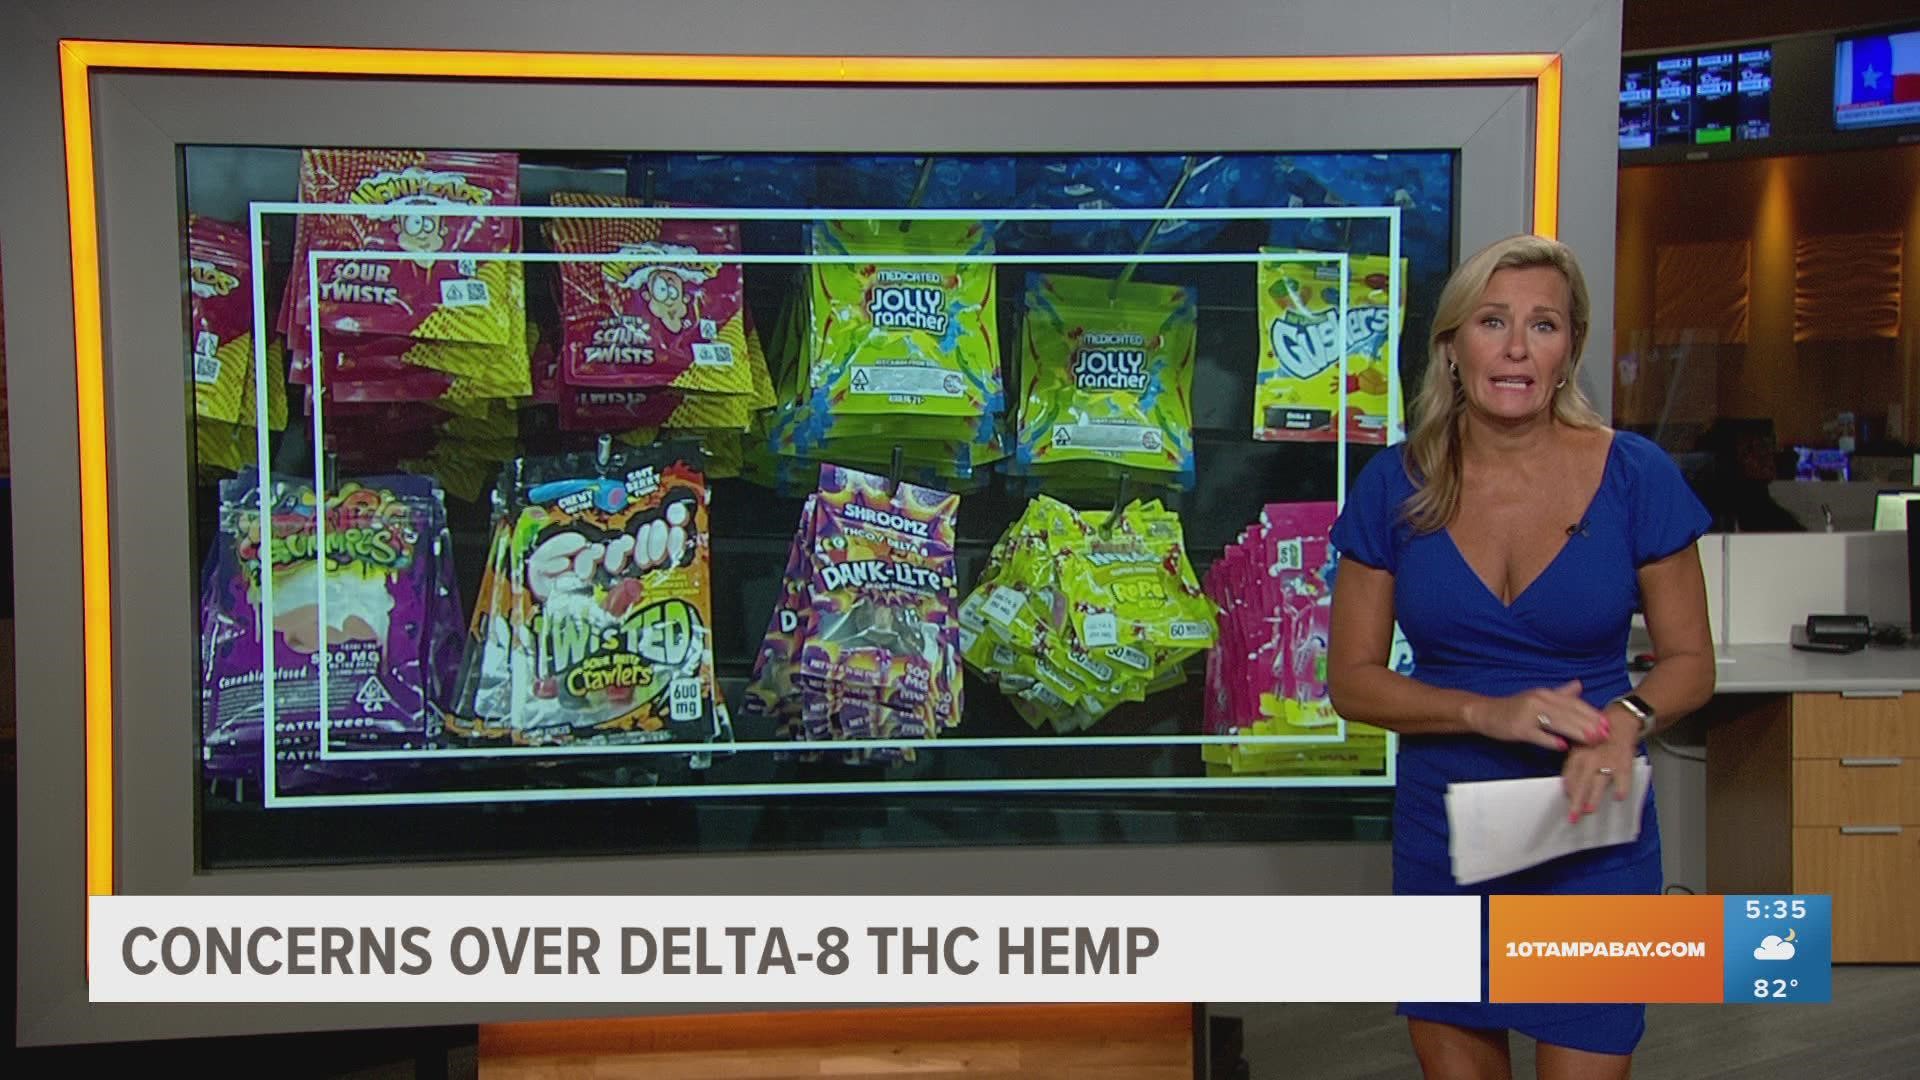 Delta-8 THC is being sold in hundreds of stores across the Tampa Bay area.